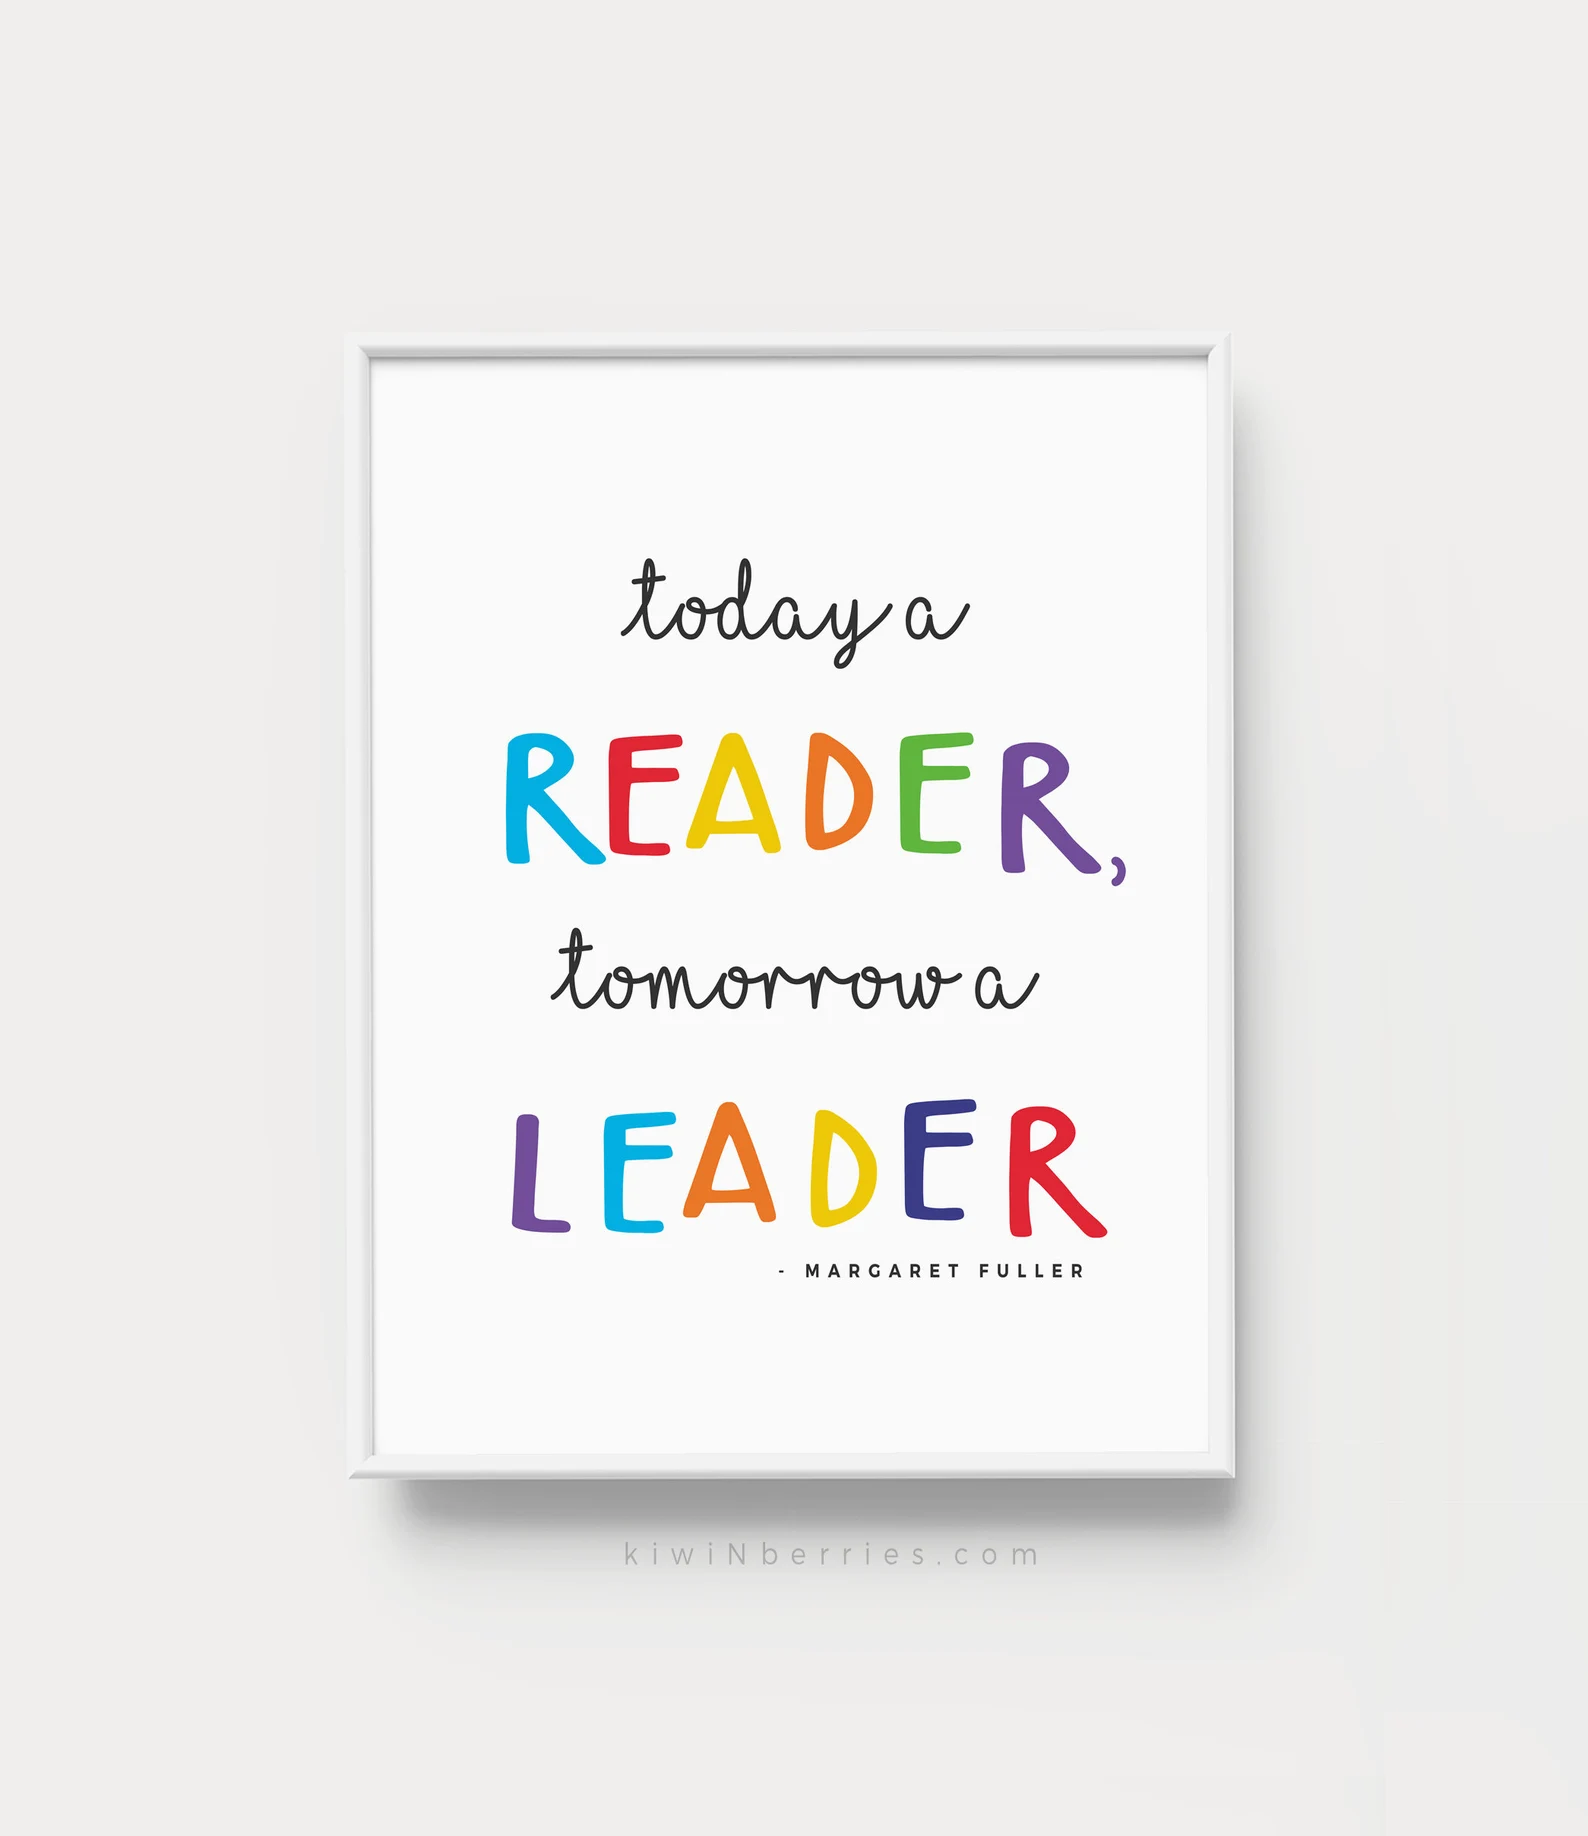 a graphic with the text "Today a reader, tomorrow a leader." - Margaret Fuller